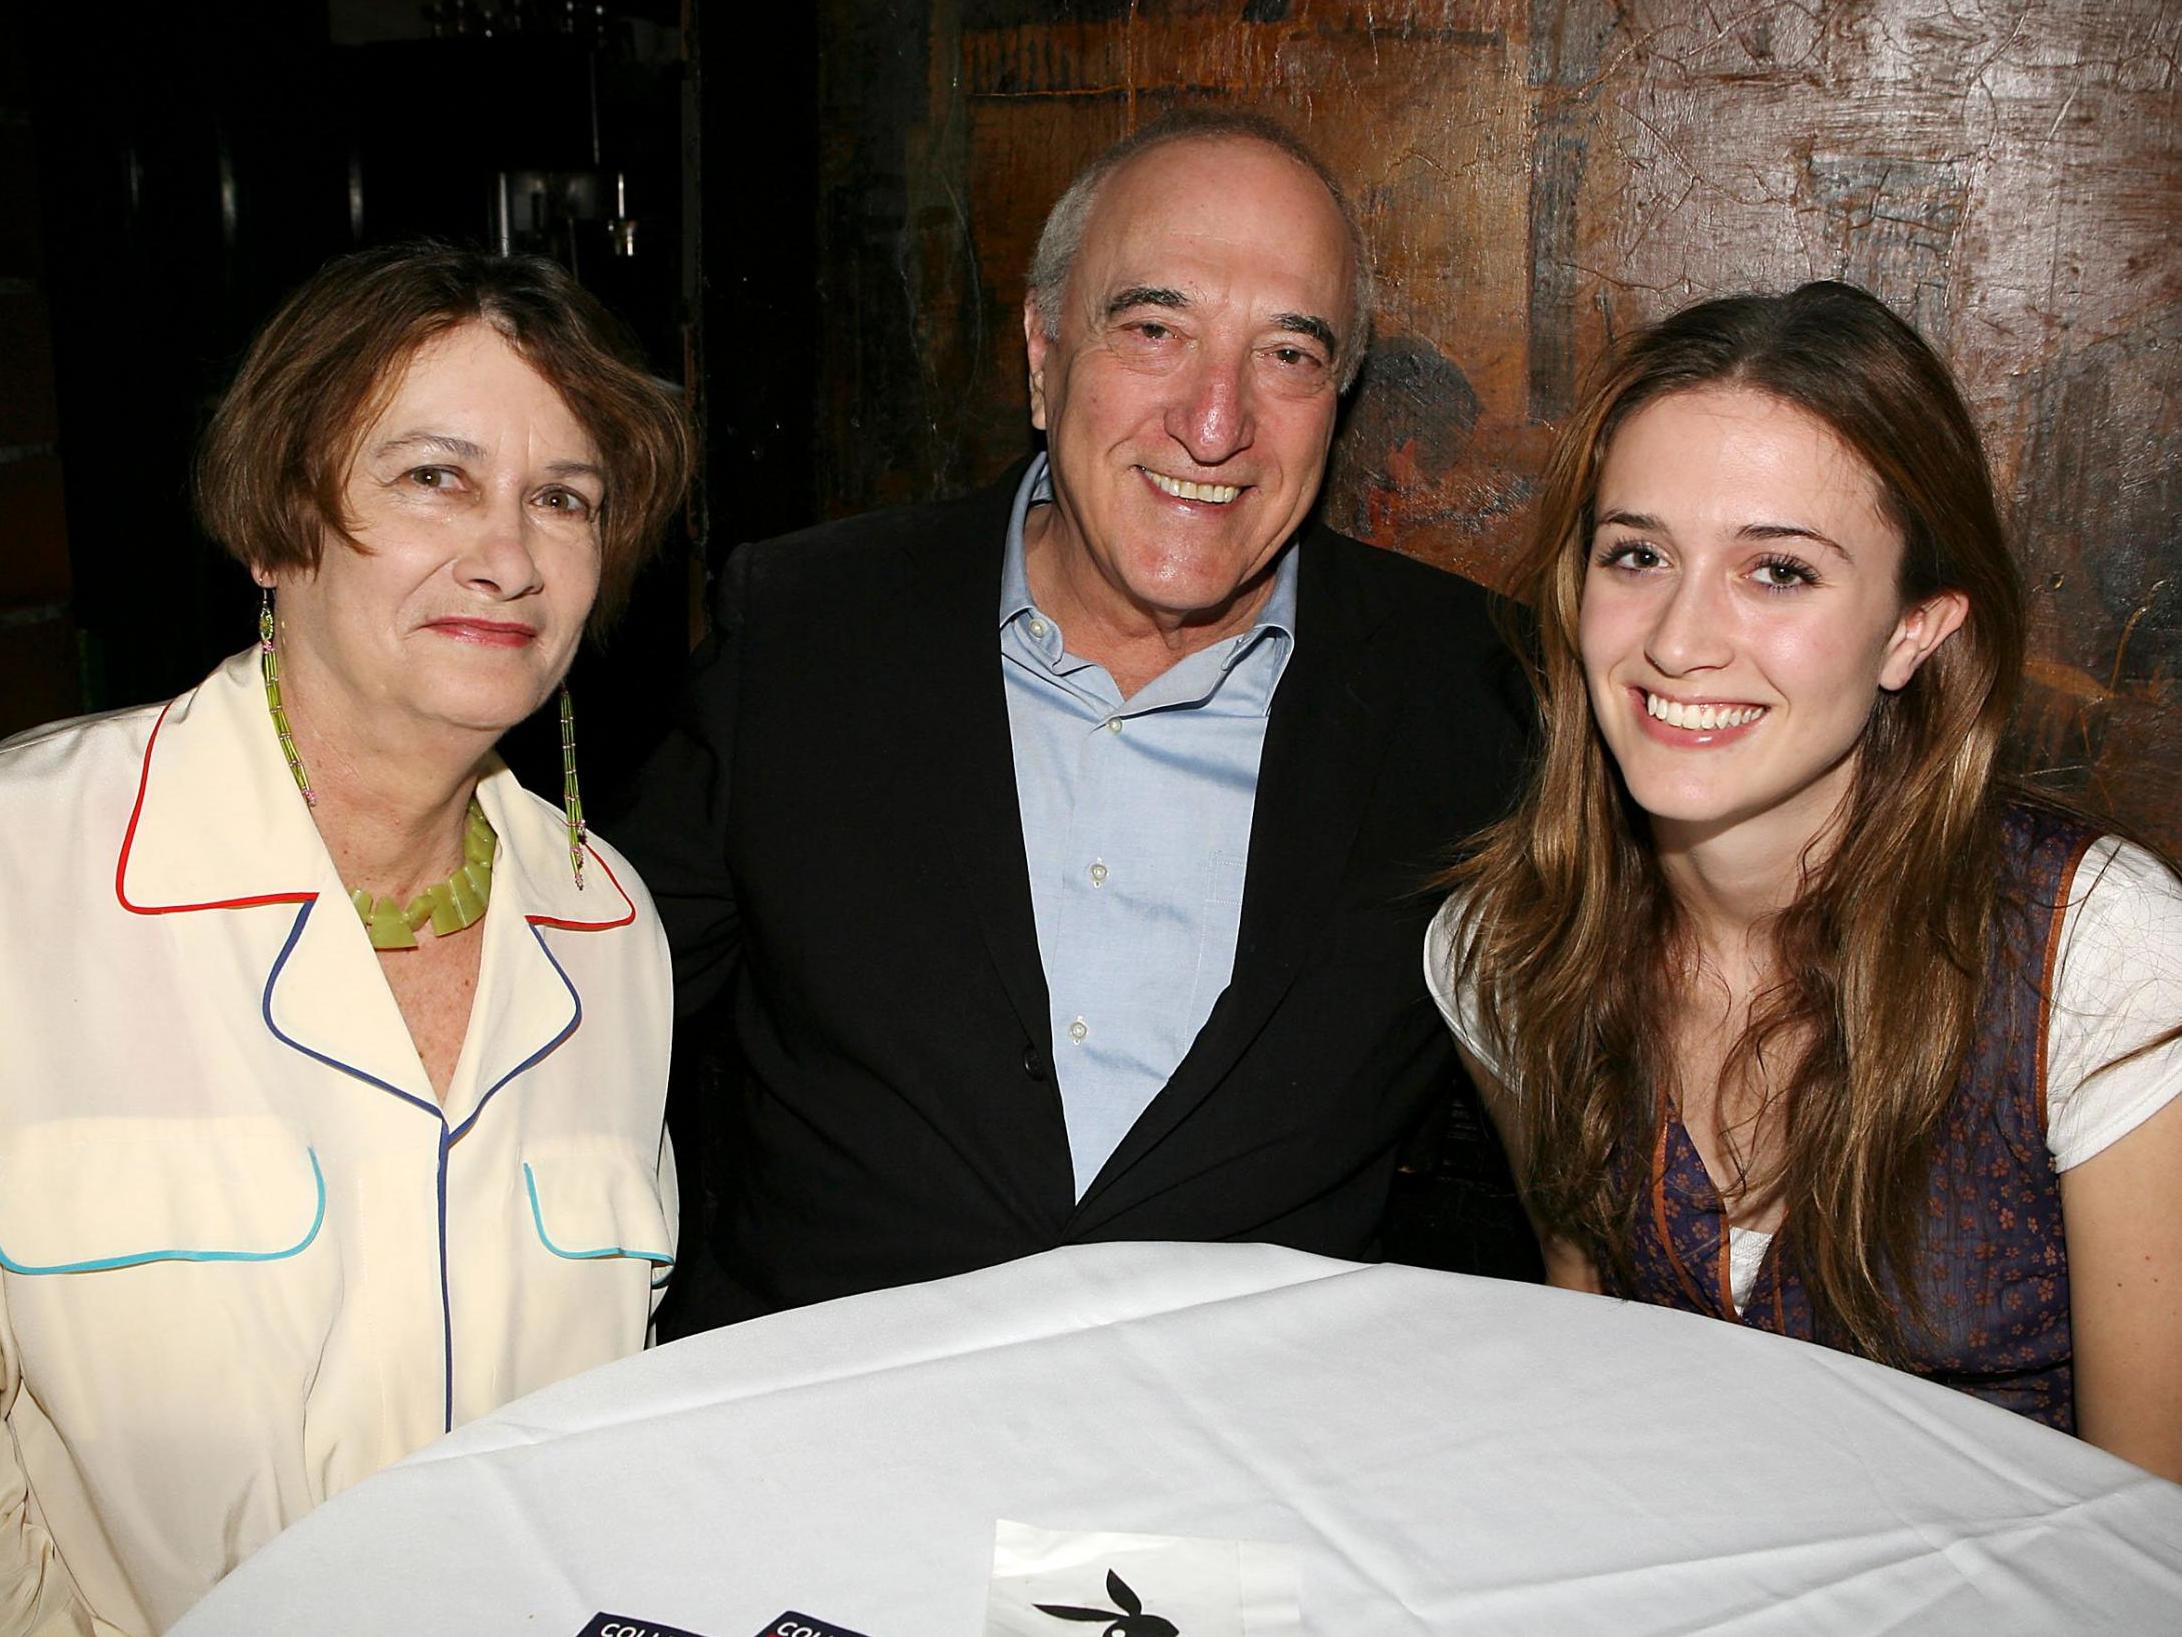 Bruce Jay Friedman with family in New York in 2006